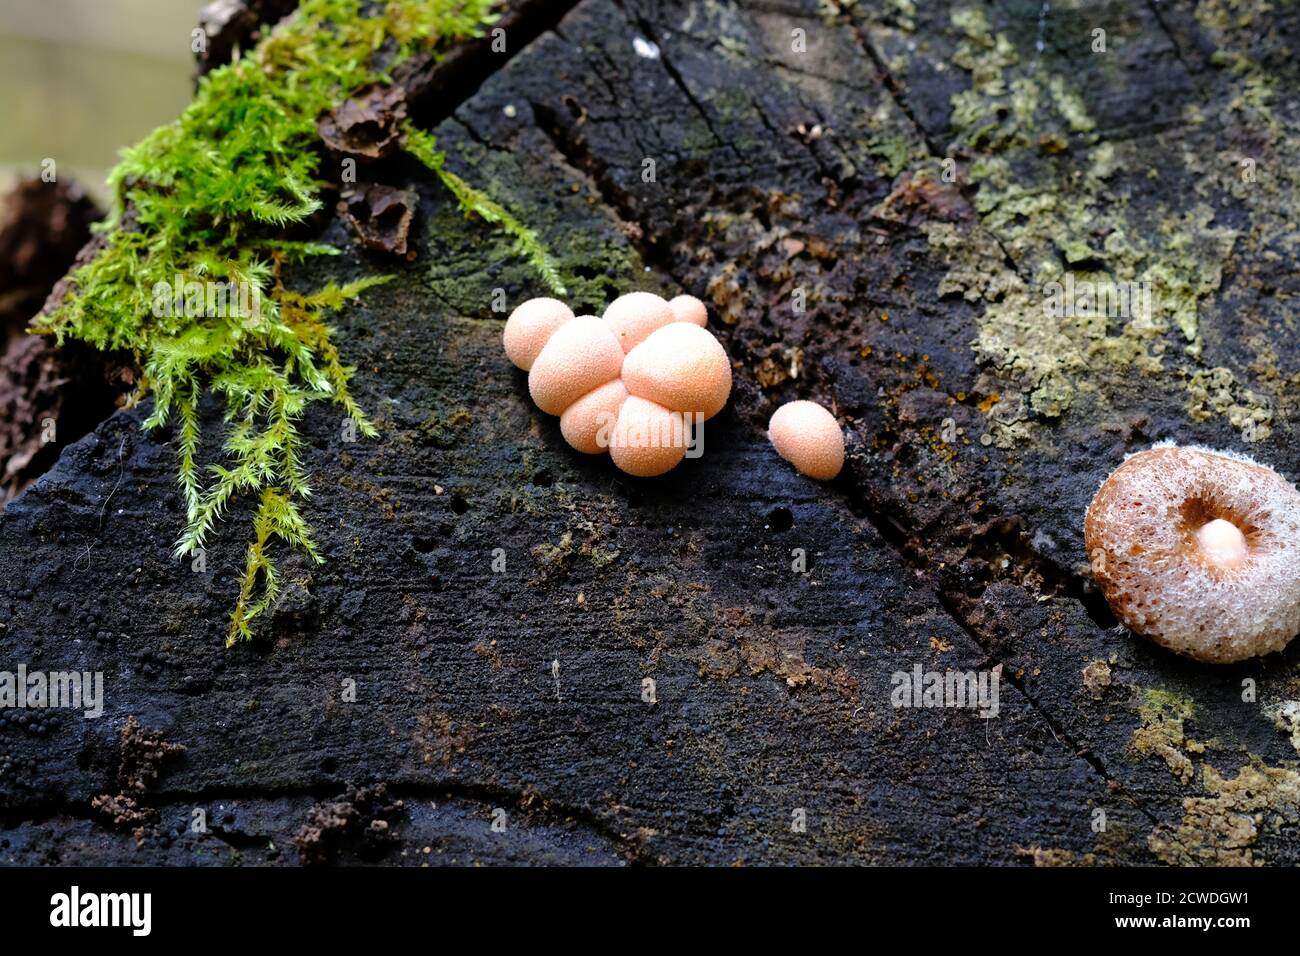 Pale pink slime mold (Lycogala epidendrum) on a rotting log in a Quebec forest, Wakefield, Canada. Not a fungus. No idea what the donut is. Stock Photo